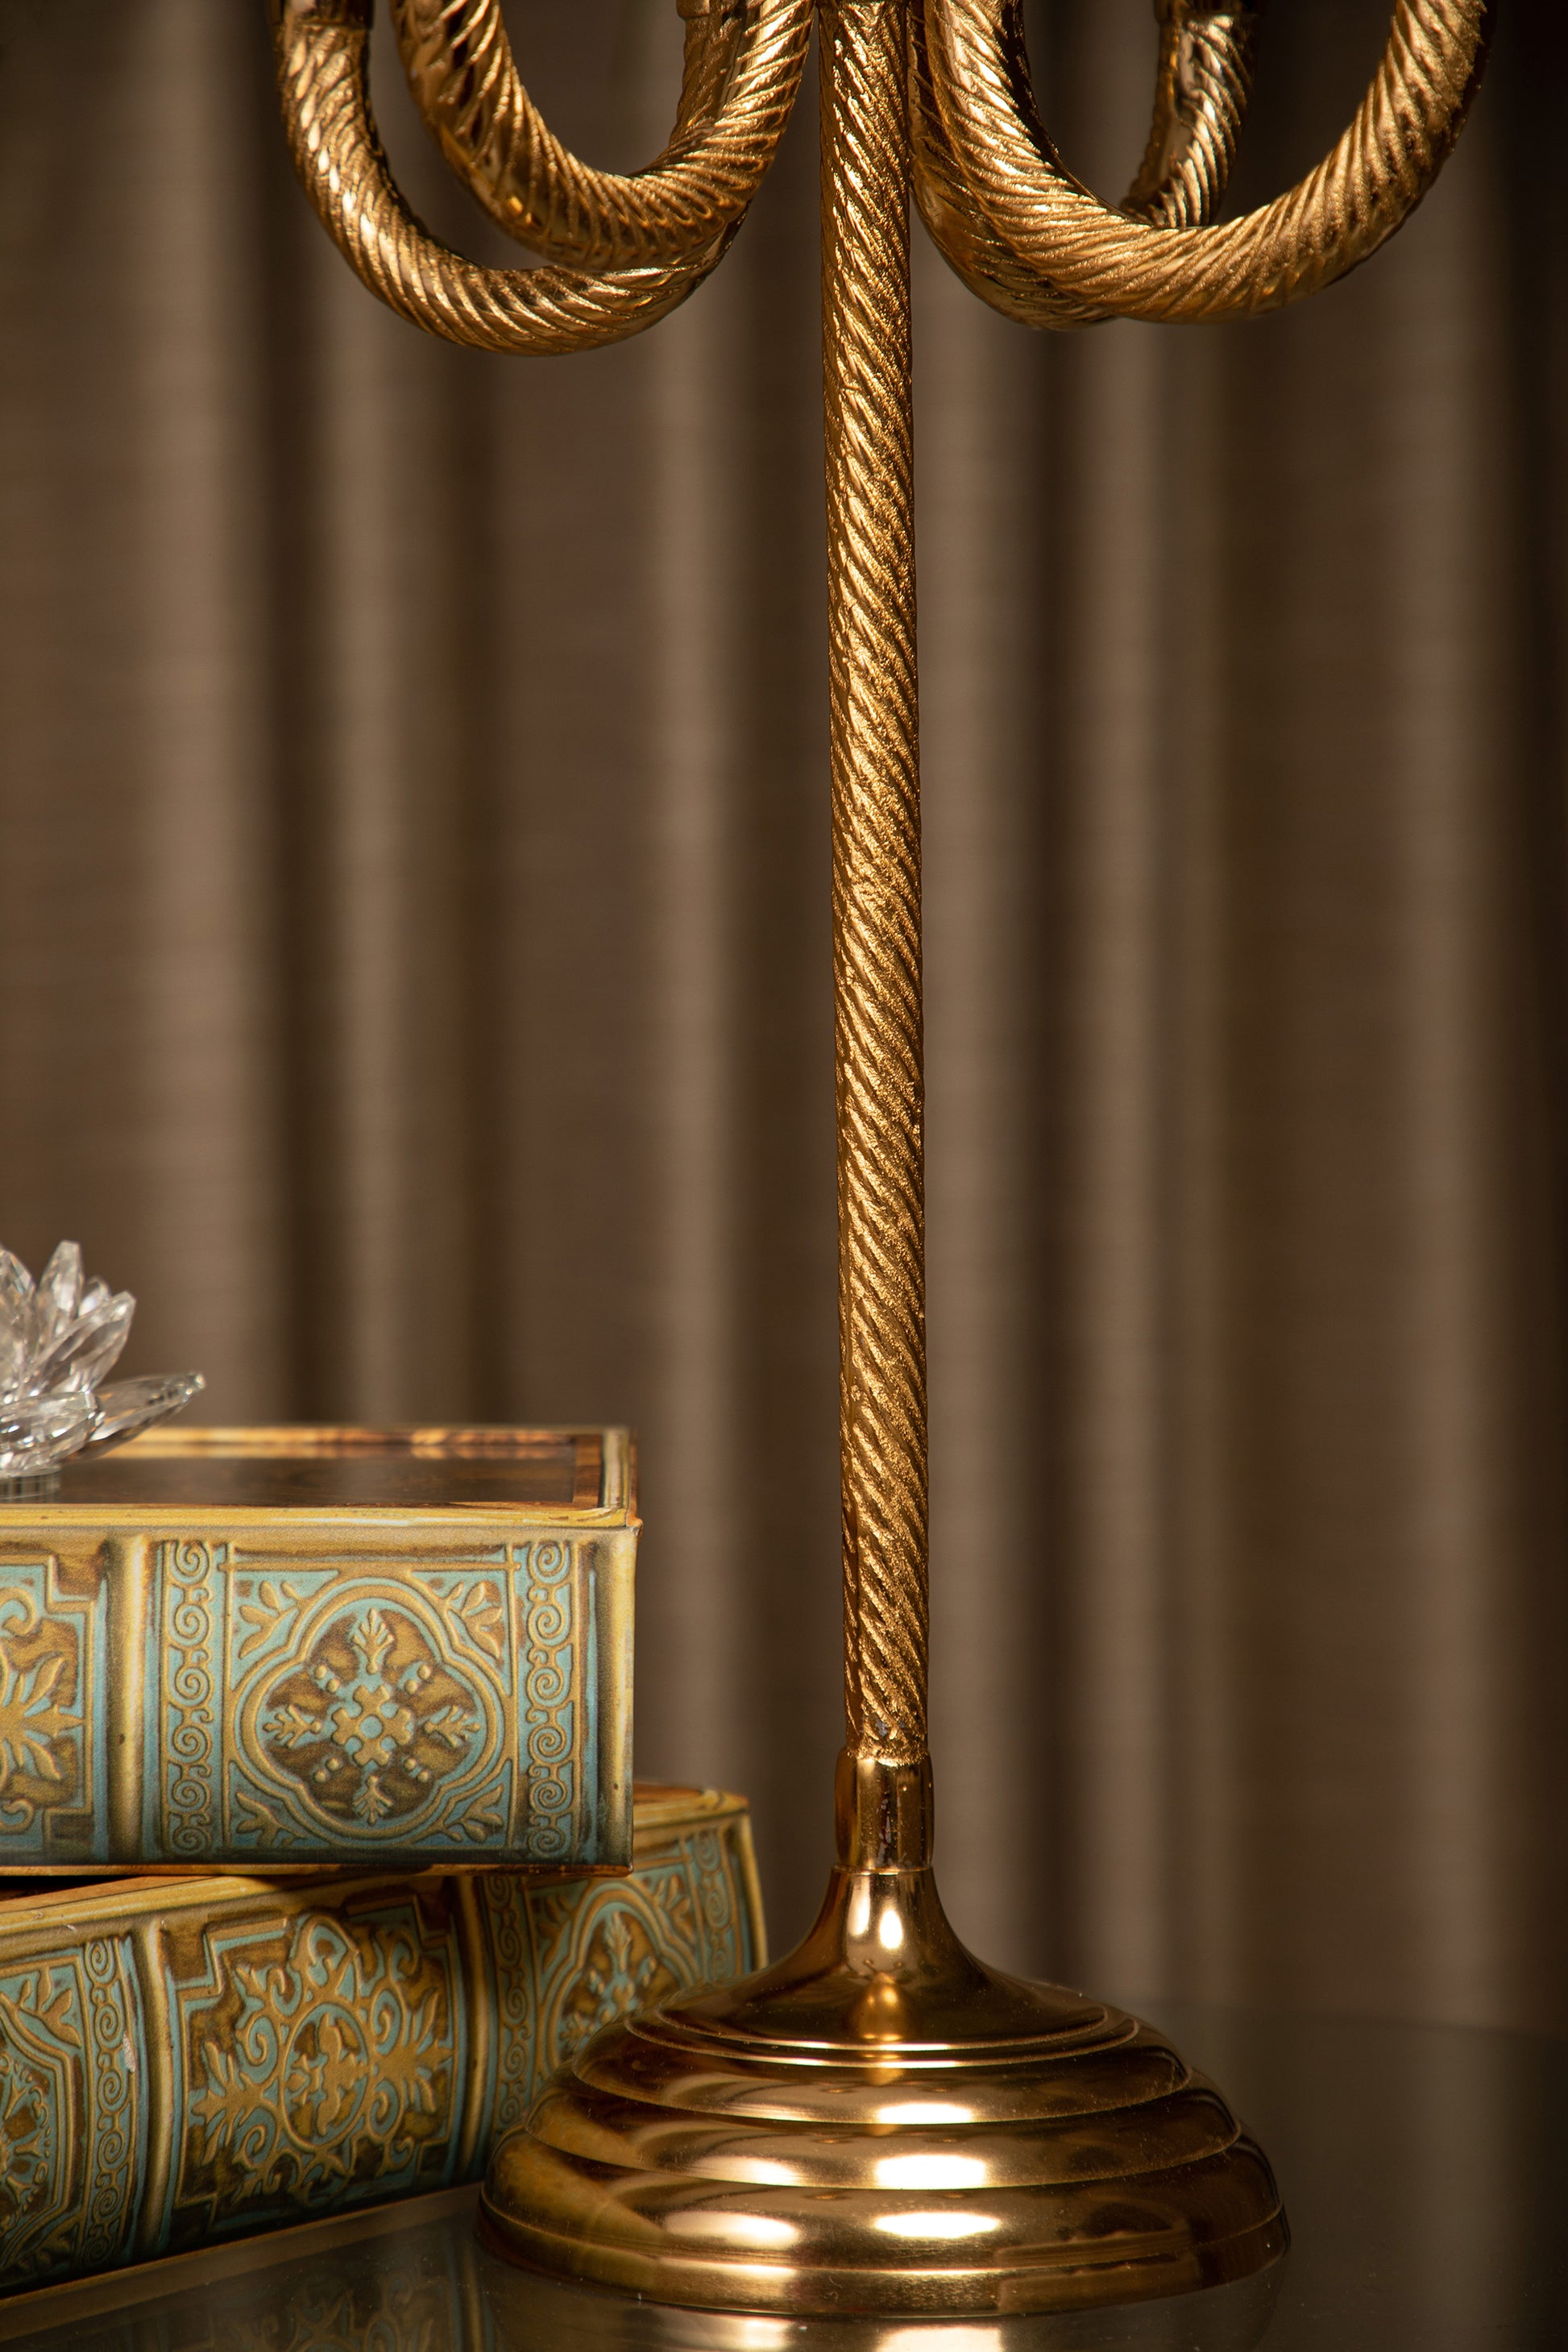 The candelabra boasts a classic and timeless design, making it a perfect fit for a wide range of interior styles, from traditional to modern.